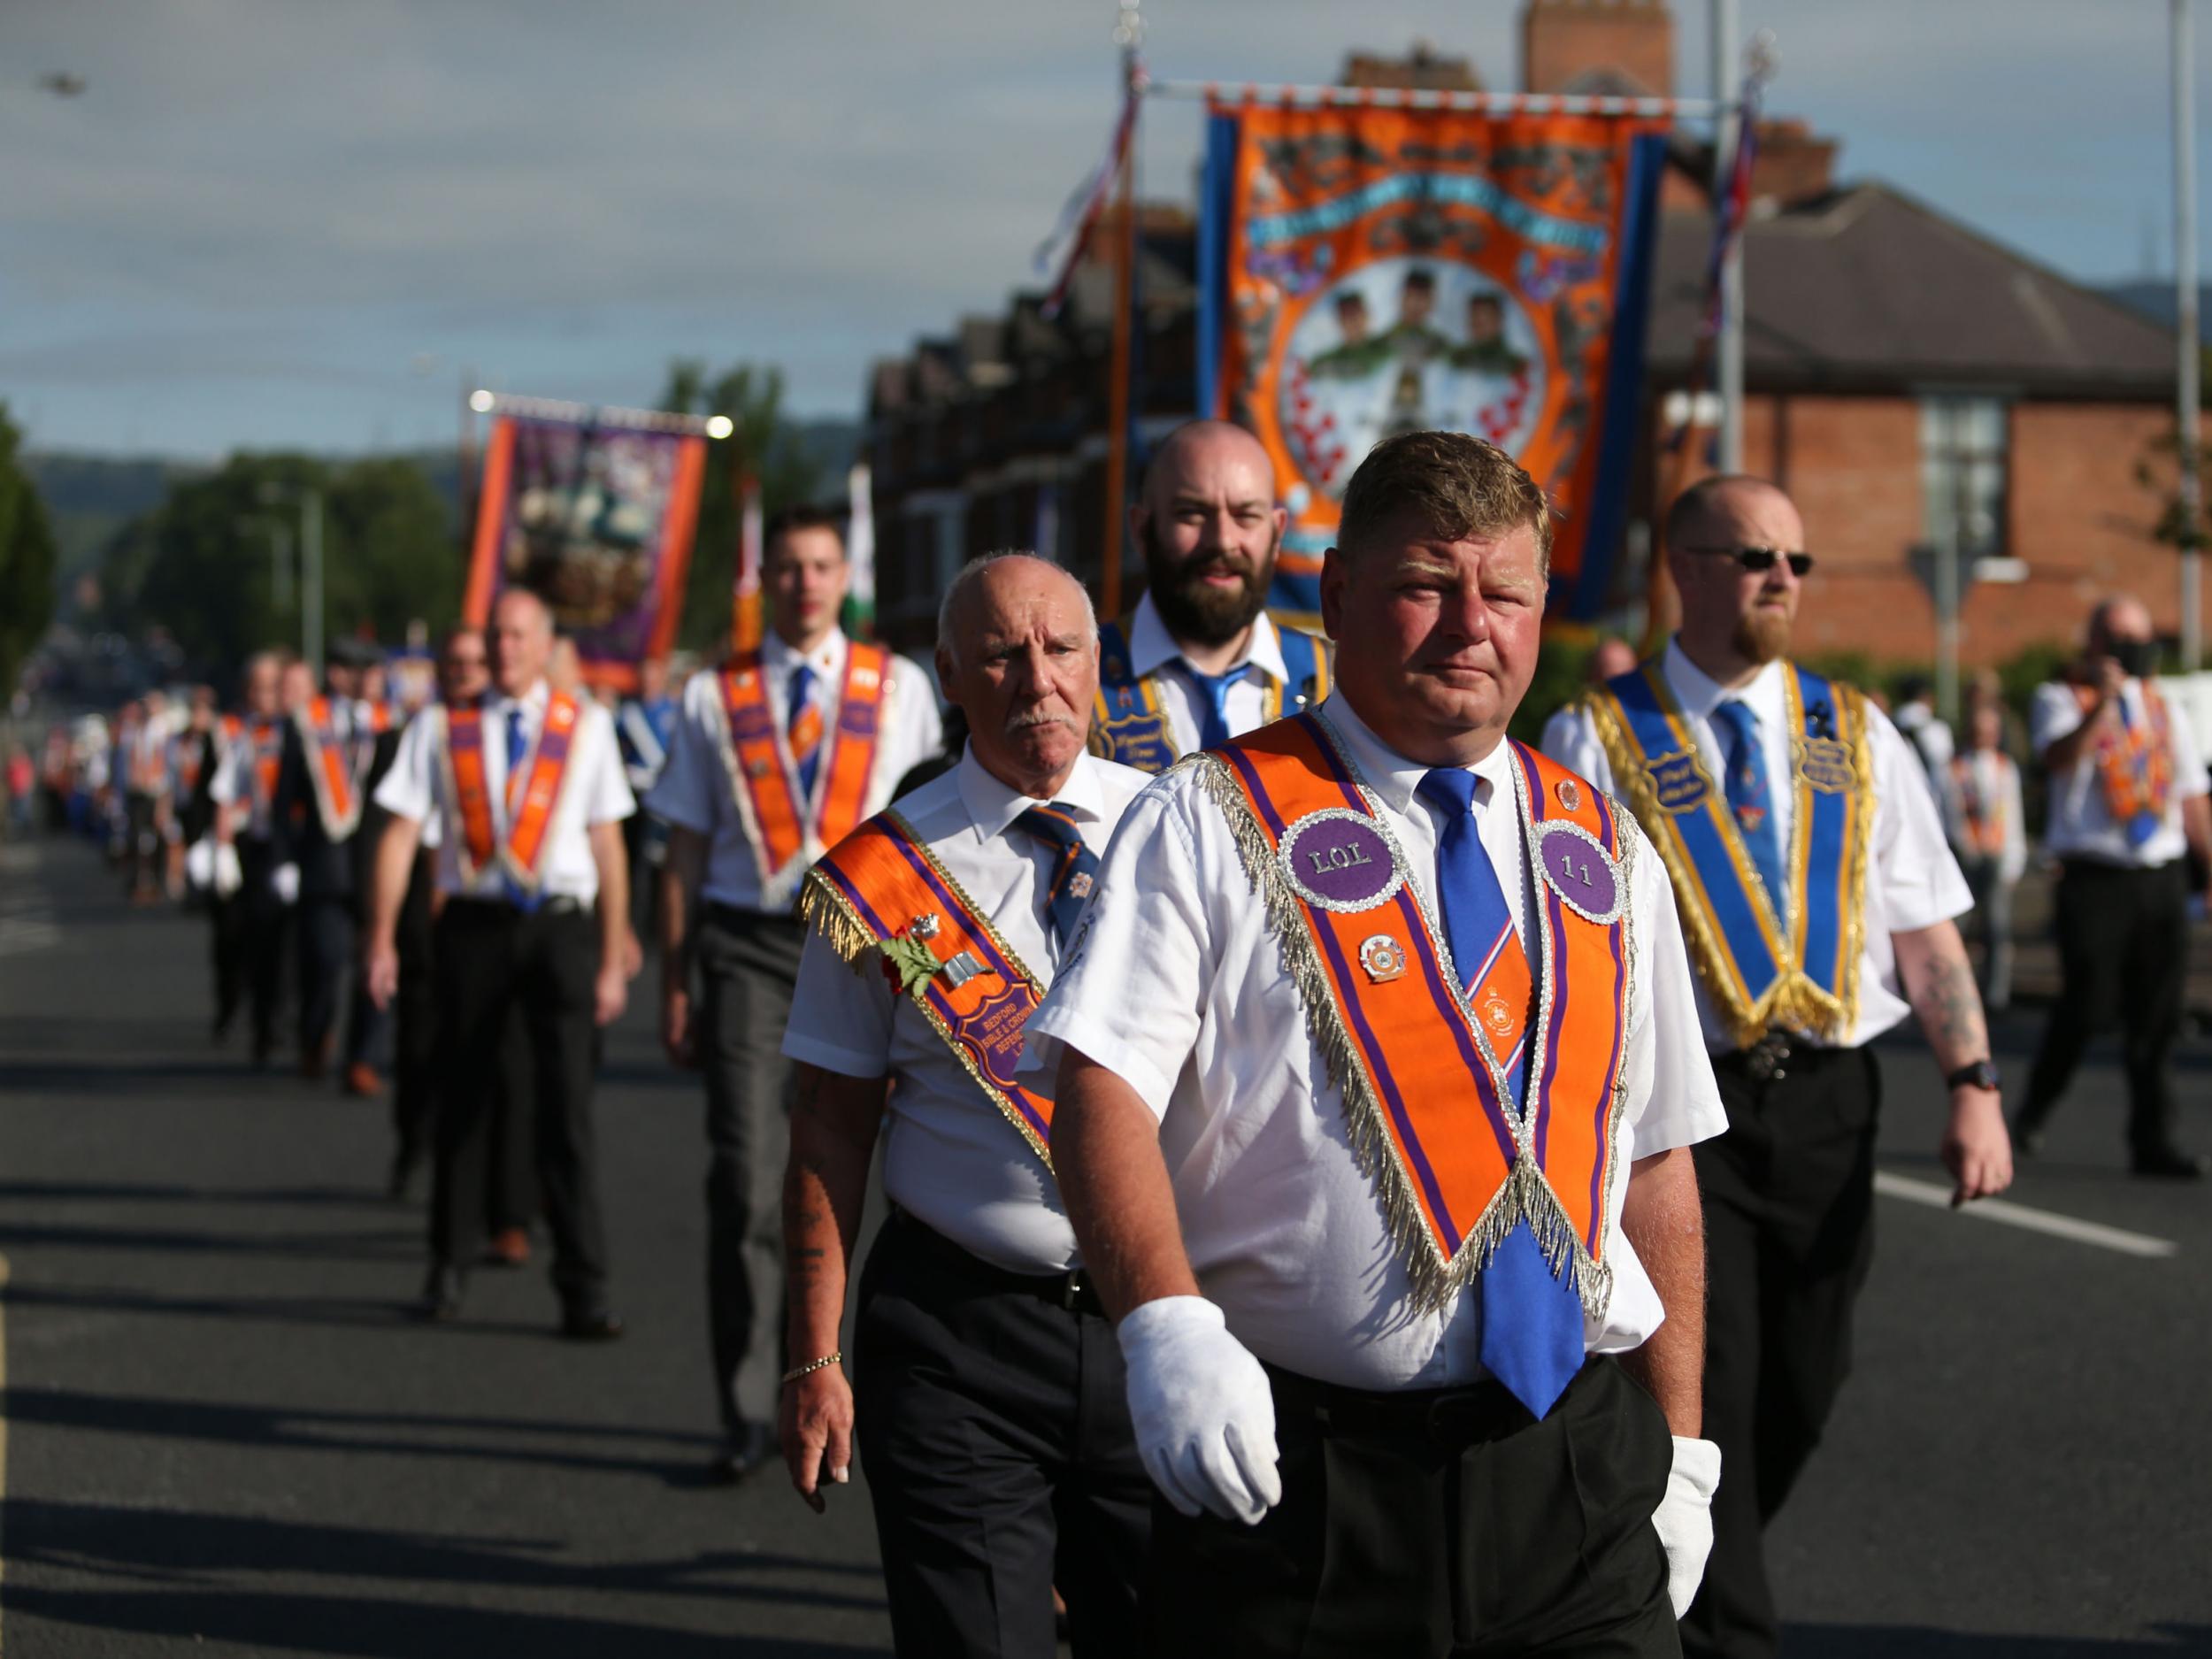 The Orange Order's marches across Northern Ireland were often flashpoints of tension during the Troubles